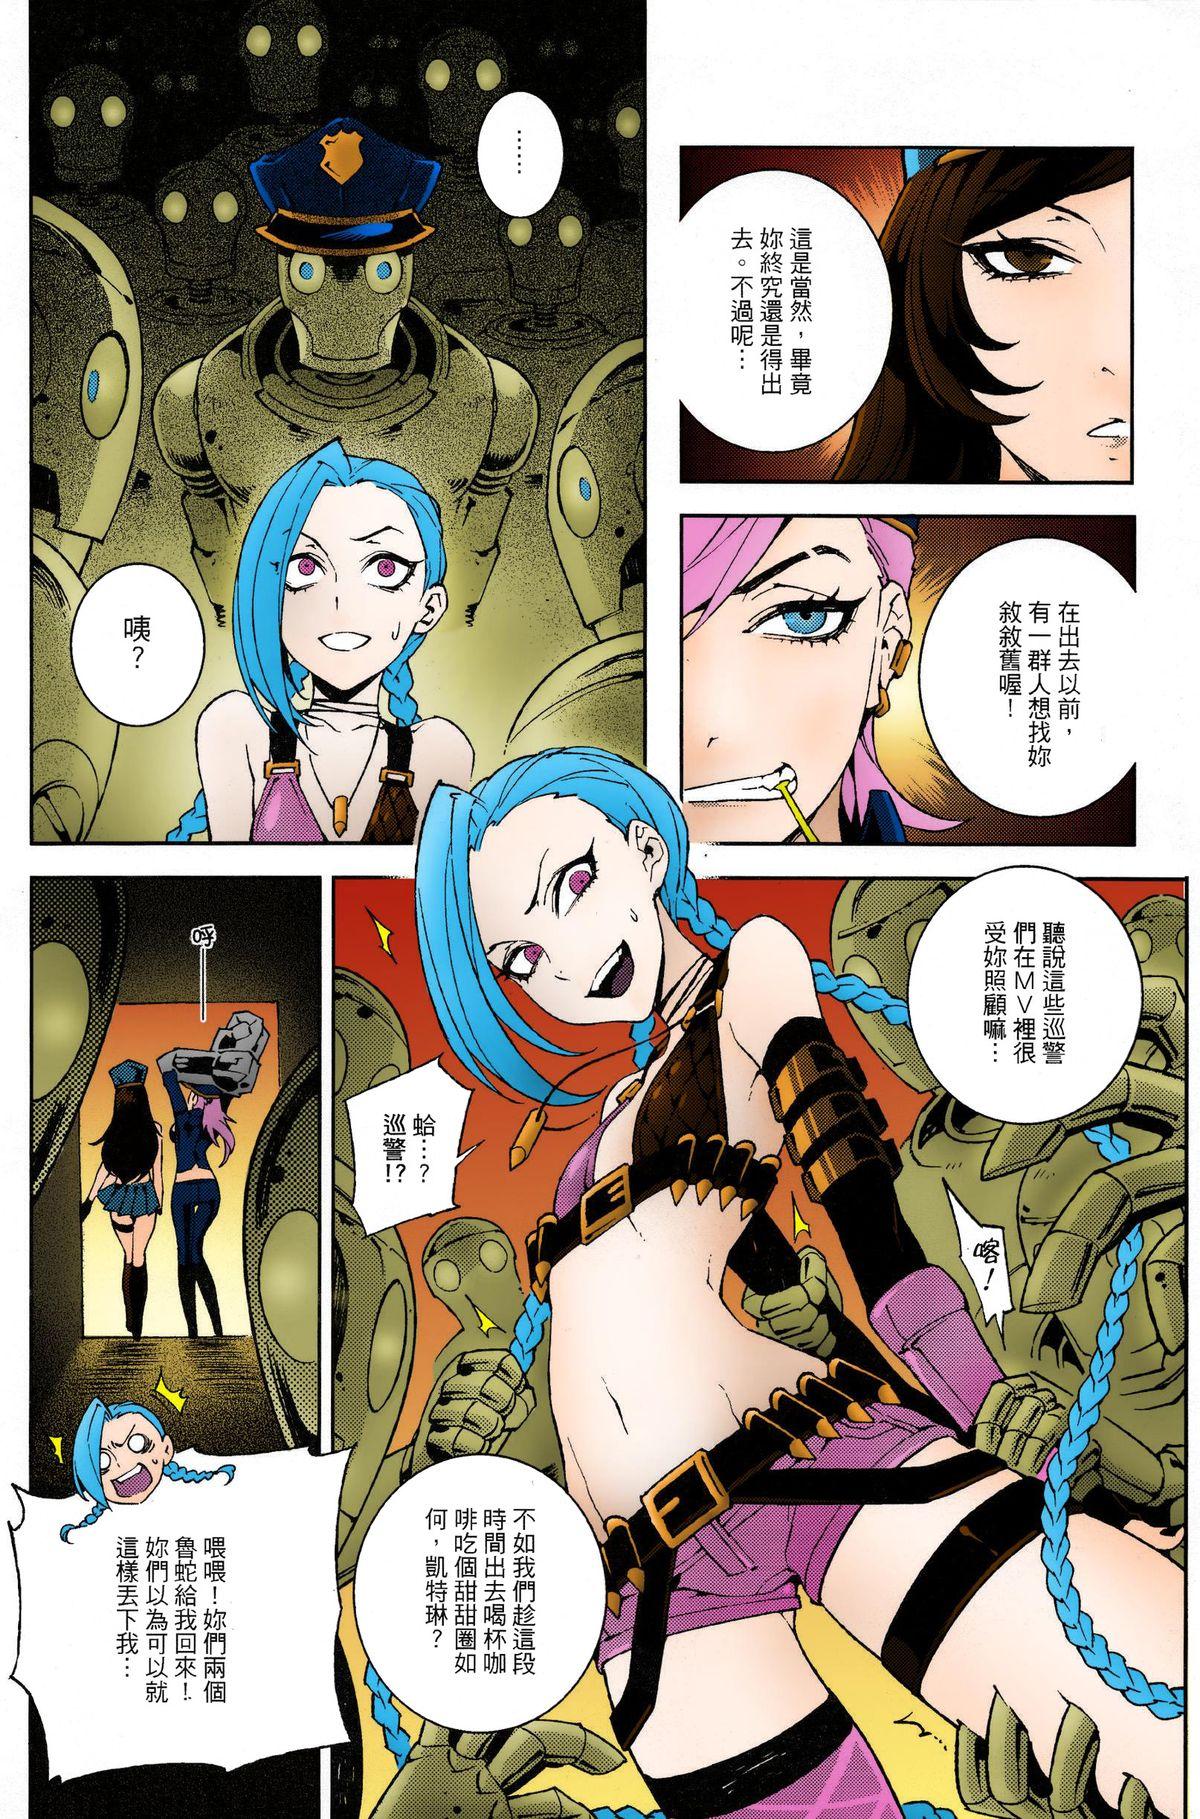 Hottie JINX Come On! Shoot Faster - League of legends Tight Ass - Page 5